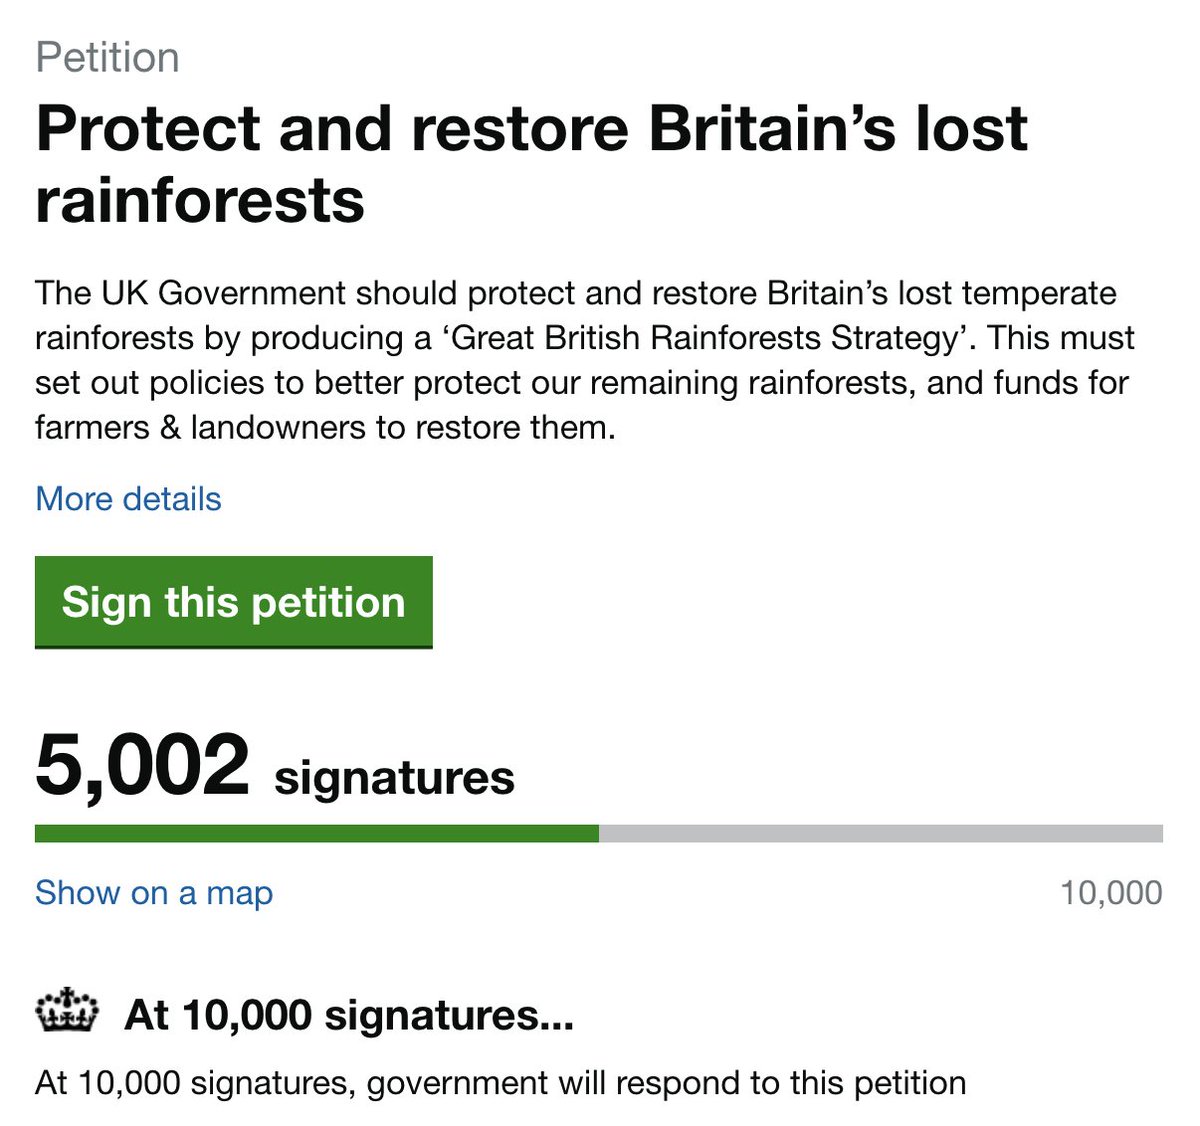 Huge thanks to the 5,000 people who've now signed my petition to protect & restore Britain's lost rainforests! We're halfway to getting a Govt response - can you help us reach 10,000 signatures by signing & sharing? petition.parliament.uk/petitions/6084…